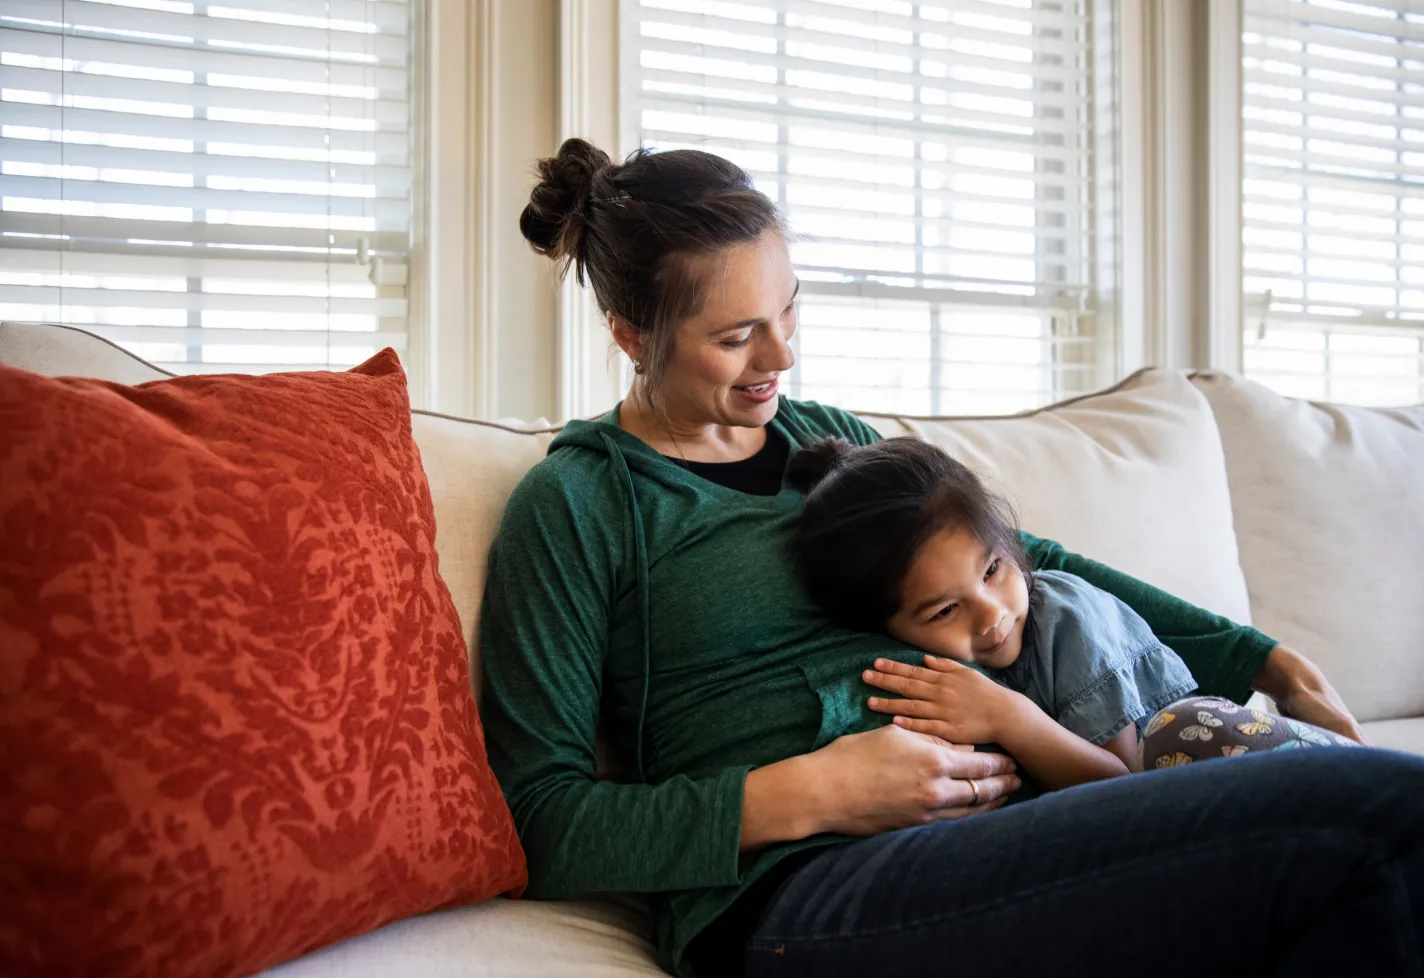 A mother and her young child are hugging each other as they sit on the couch. The child has their hand and ear on their mothers abdomen.